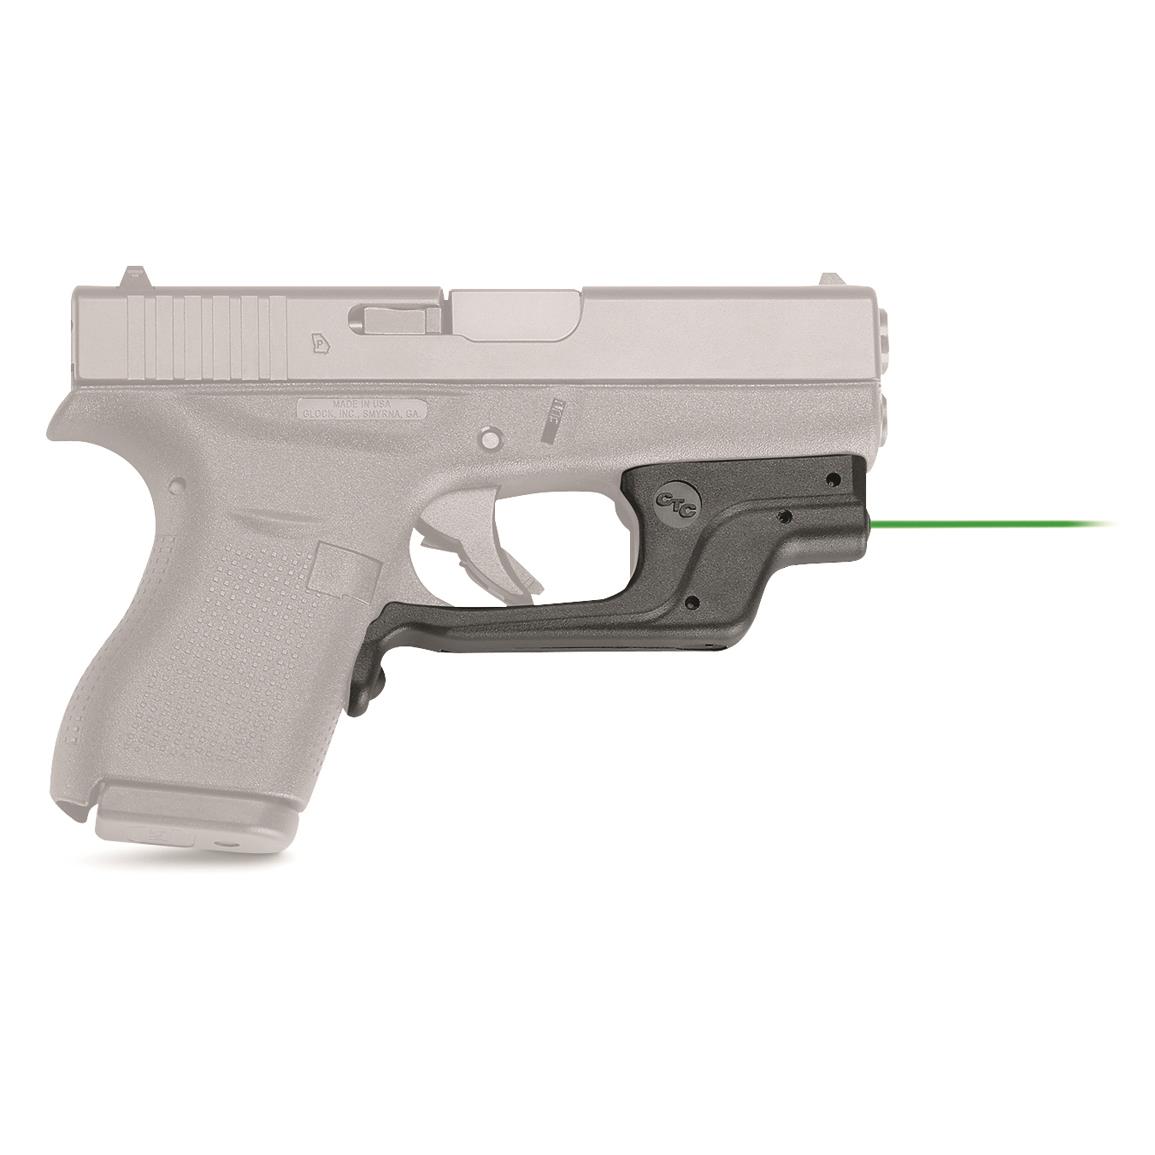 Crimson Trace LG-443G Laserguard Green Laser for Glock 42, 43, 43X and 48